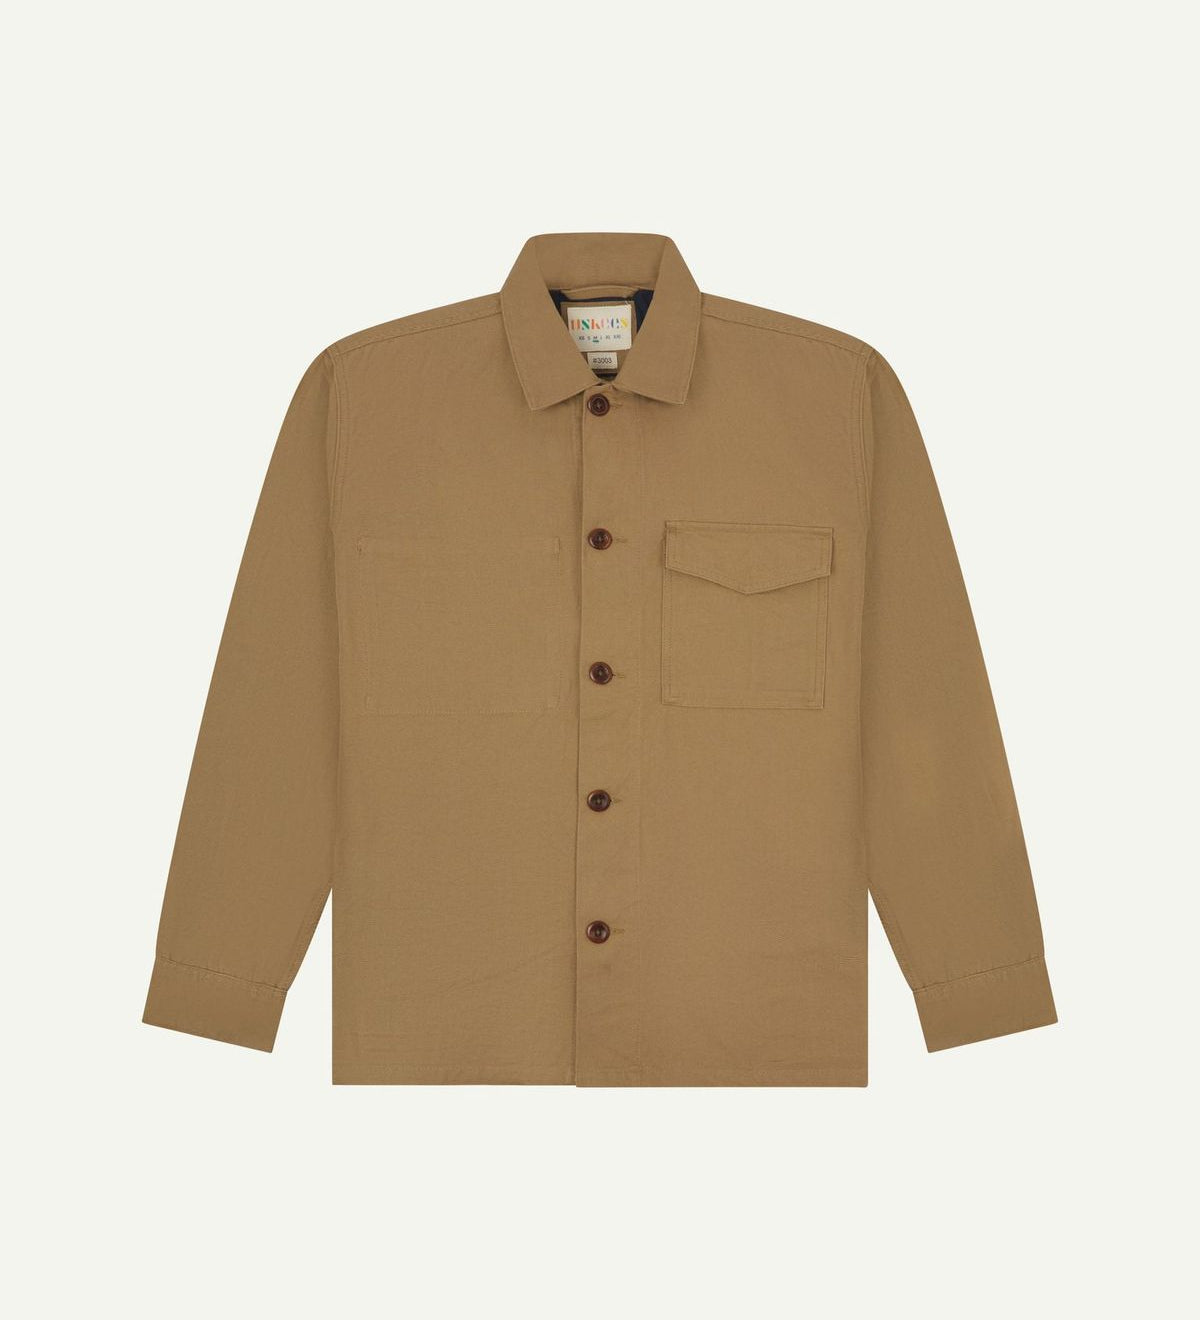 Front view of khaki buttoned 3003 workshirt from Uskees. Showing chest pocket with flap and corozo buttons.